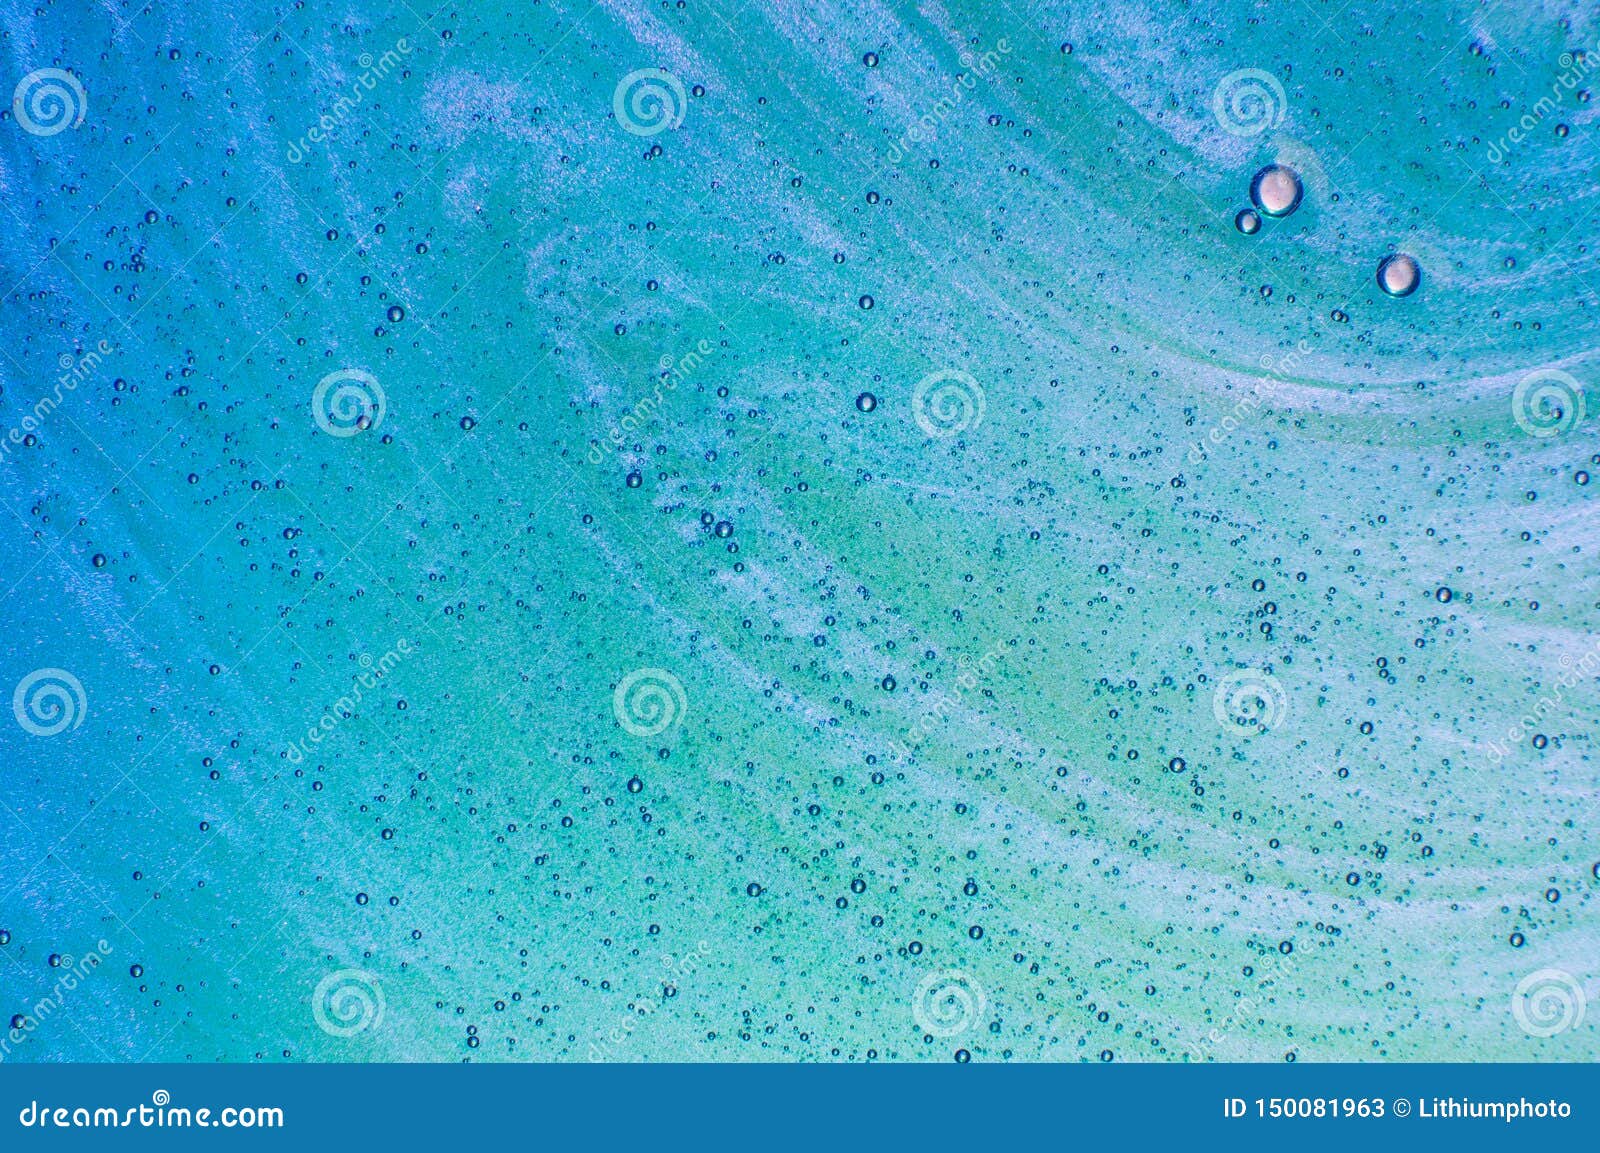 Abstract Textured Blue And Mint Gradient Background Stock Image